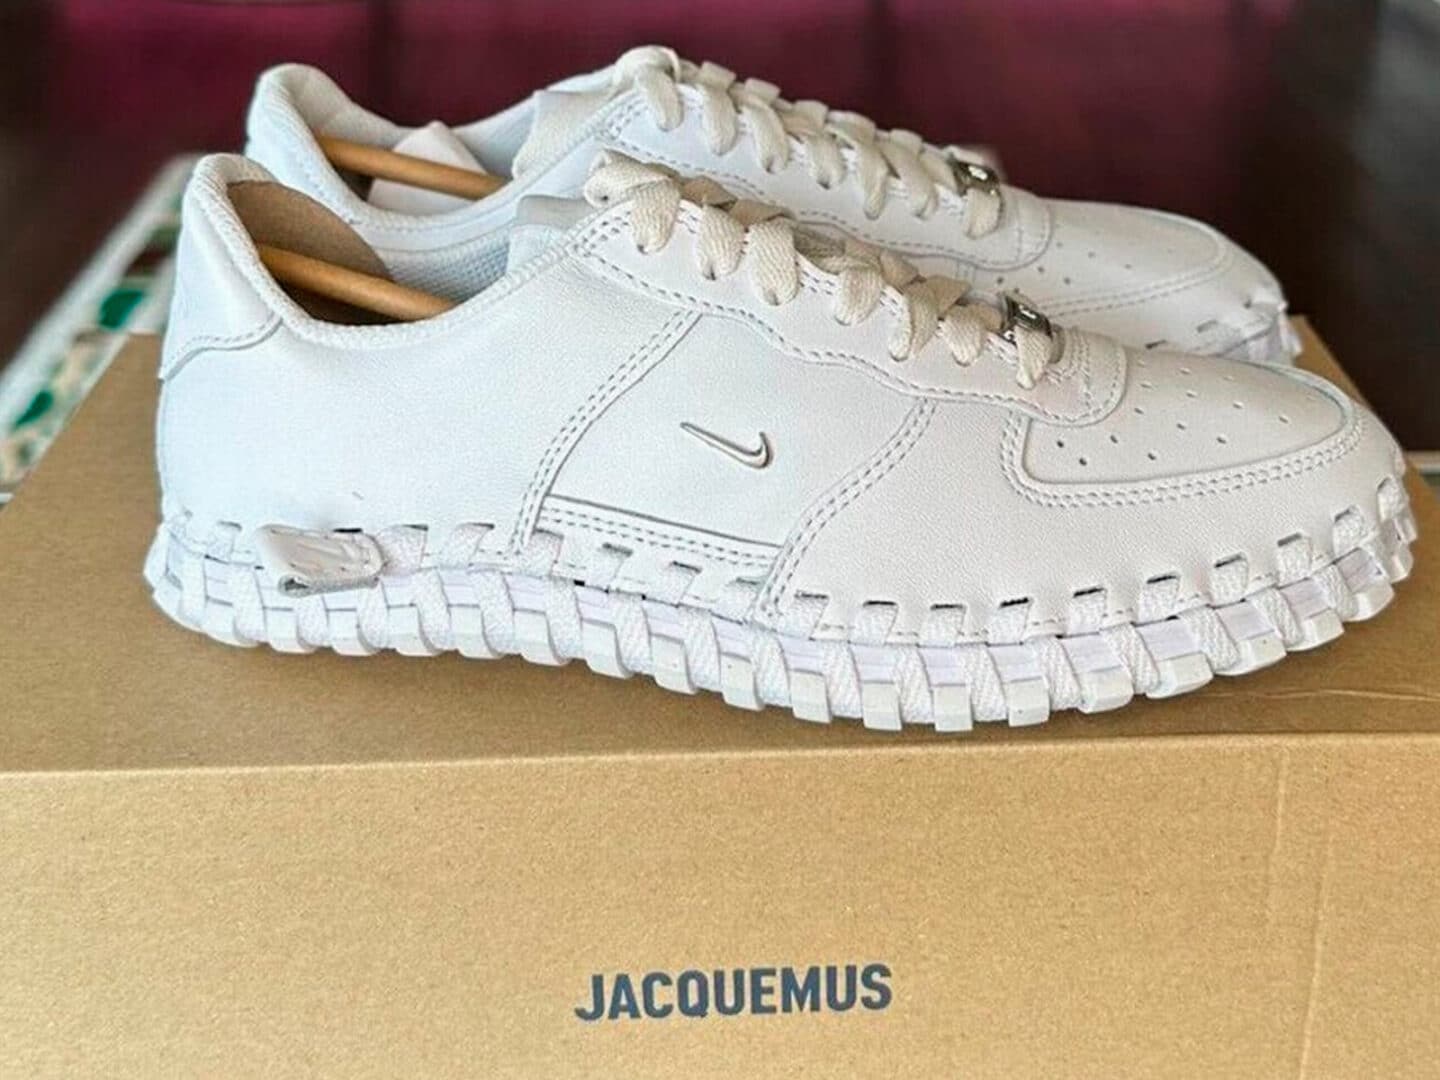 First images of the Jacquemus x Nike J Force 1